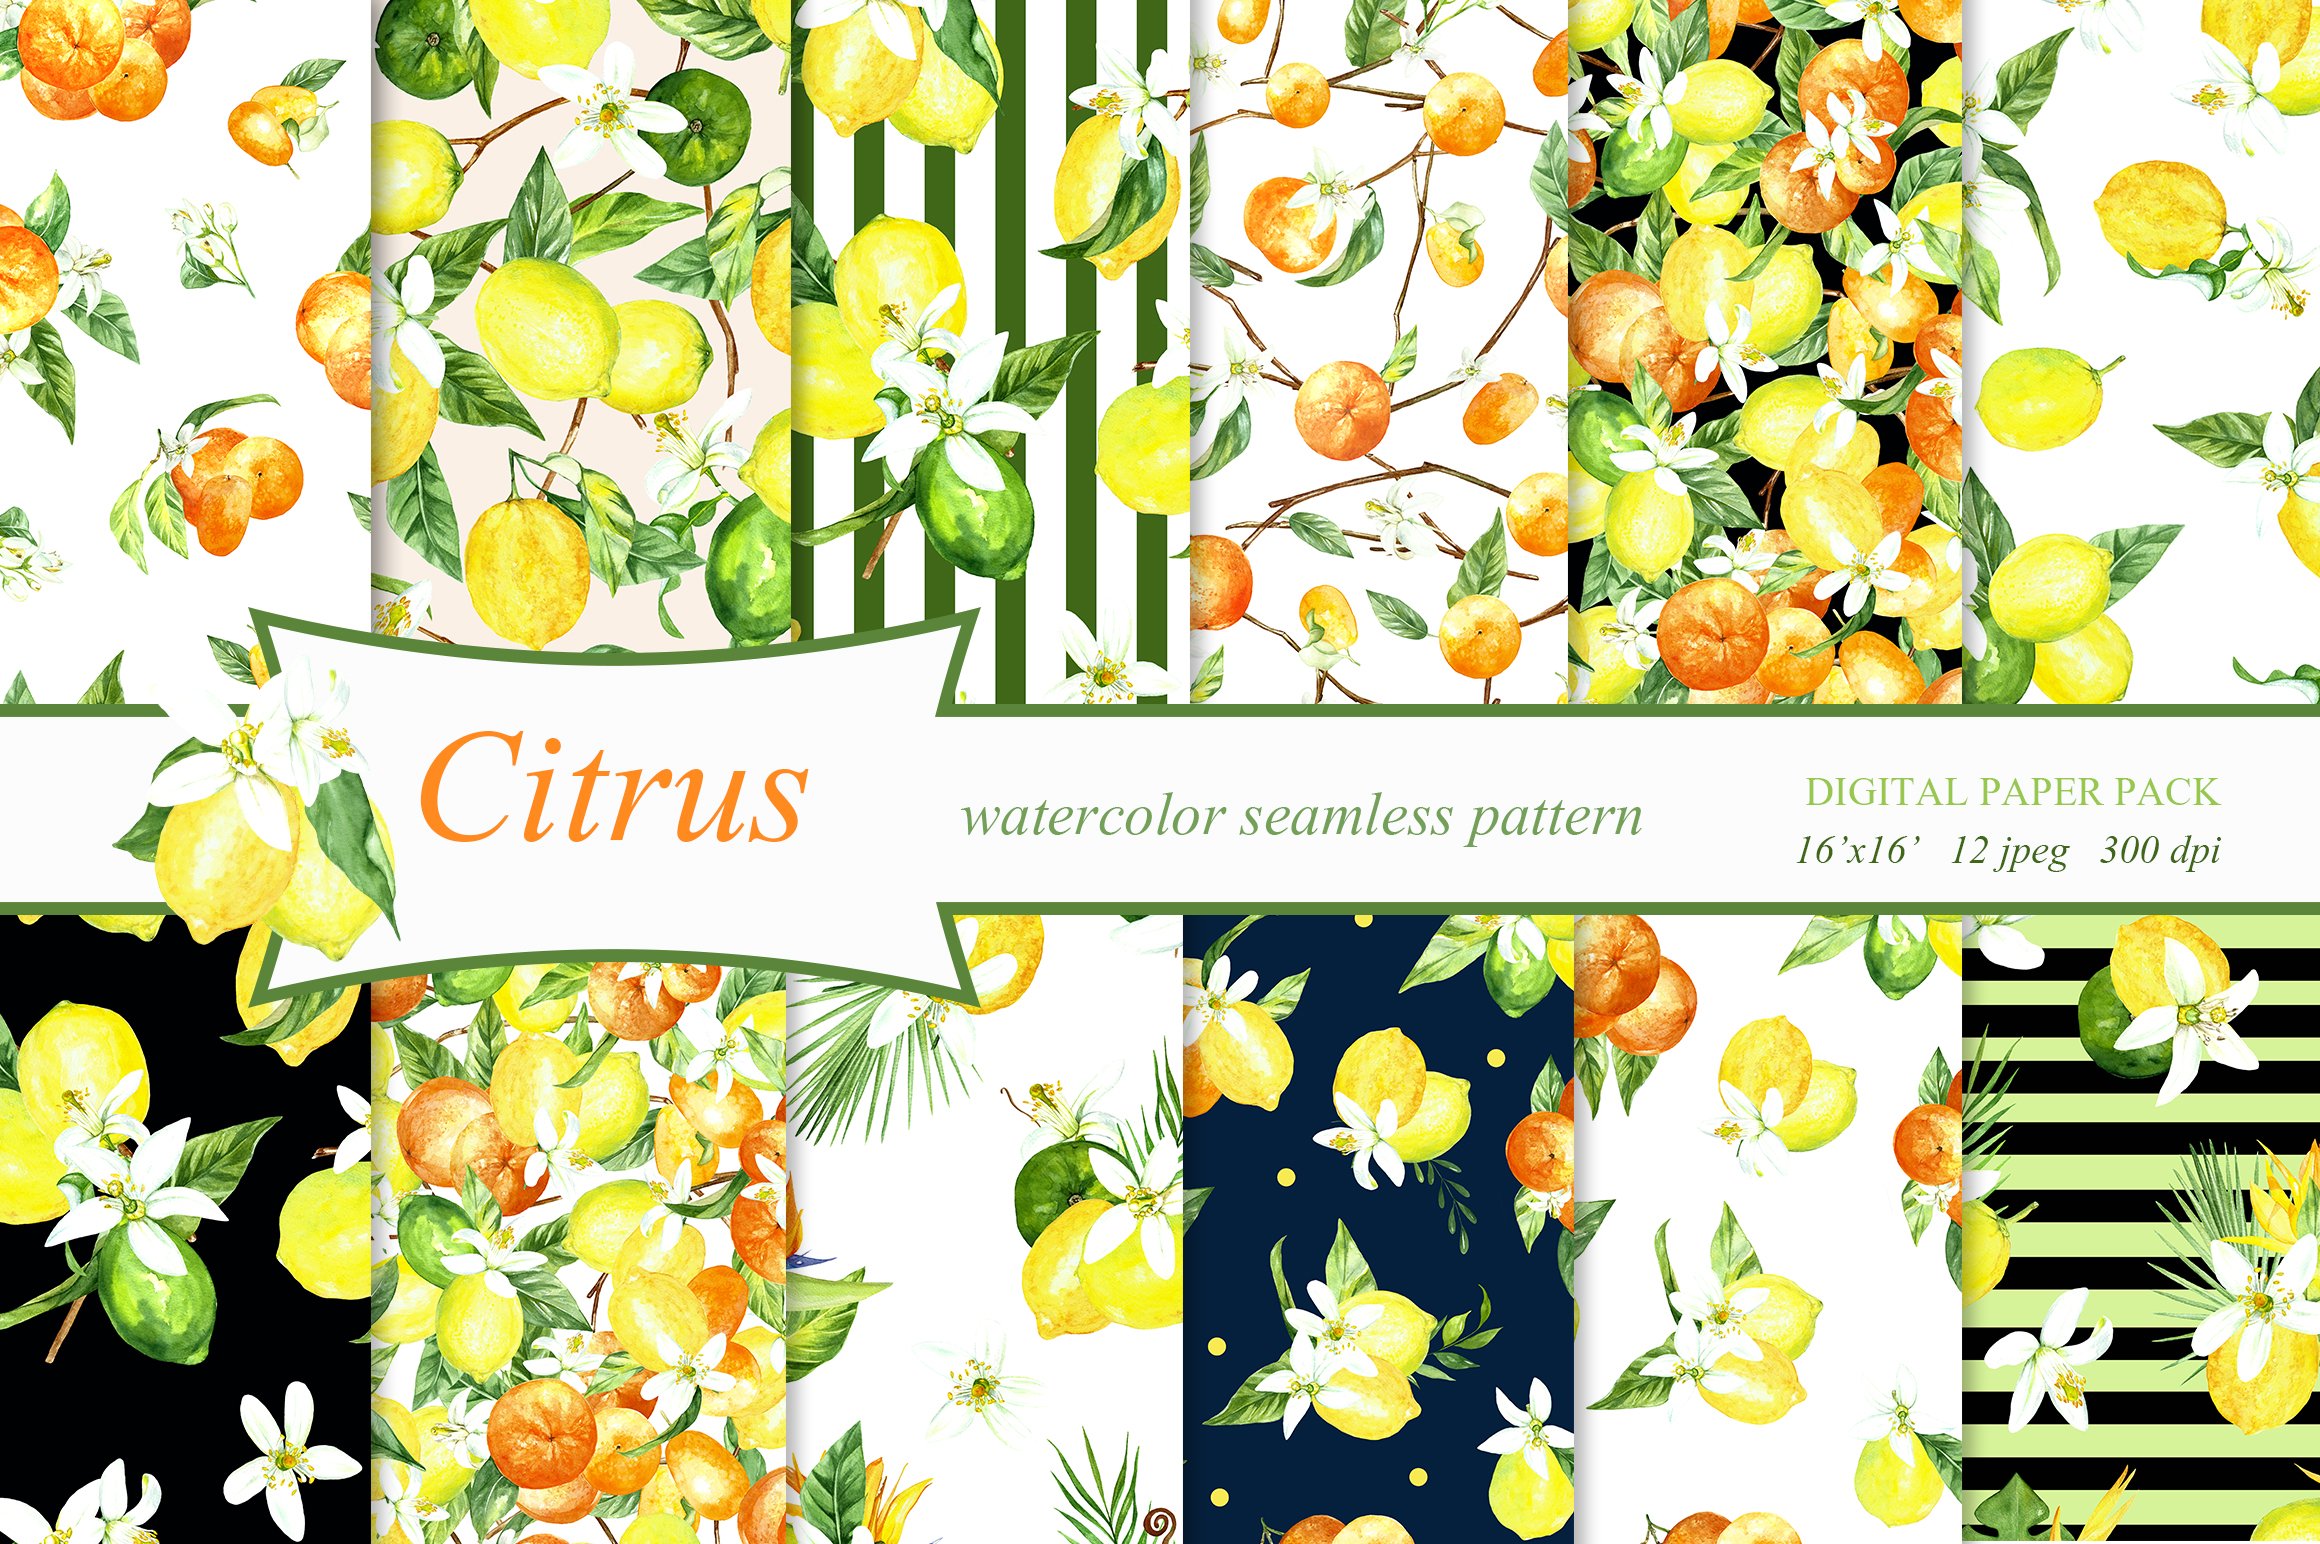 citrus watercolor seamless pattern cover image.